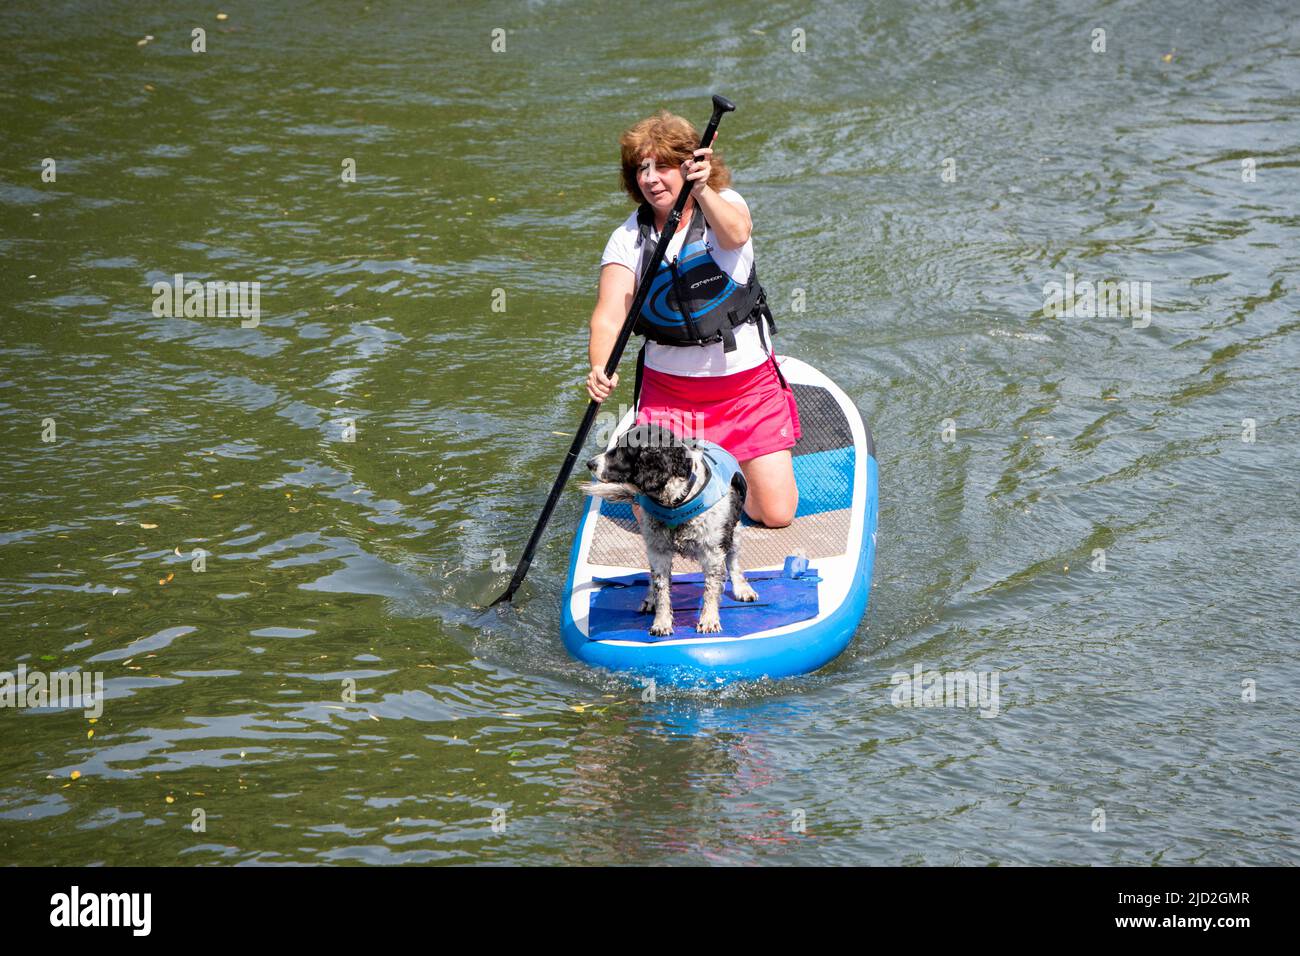 Cambridge, UK. 17th June, 2022. A woman and a dog keep cool in the sunny hot weather on a paddle board on the River Cam. Today is expected to be the hottest day of the year in the UK so far and temperatures are expected to rise above 30c in the heatwave. Credit: Julian Eales/Alamy Live News Stock Photo